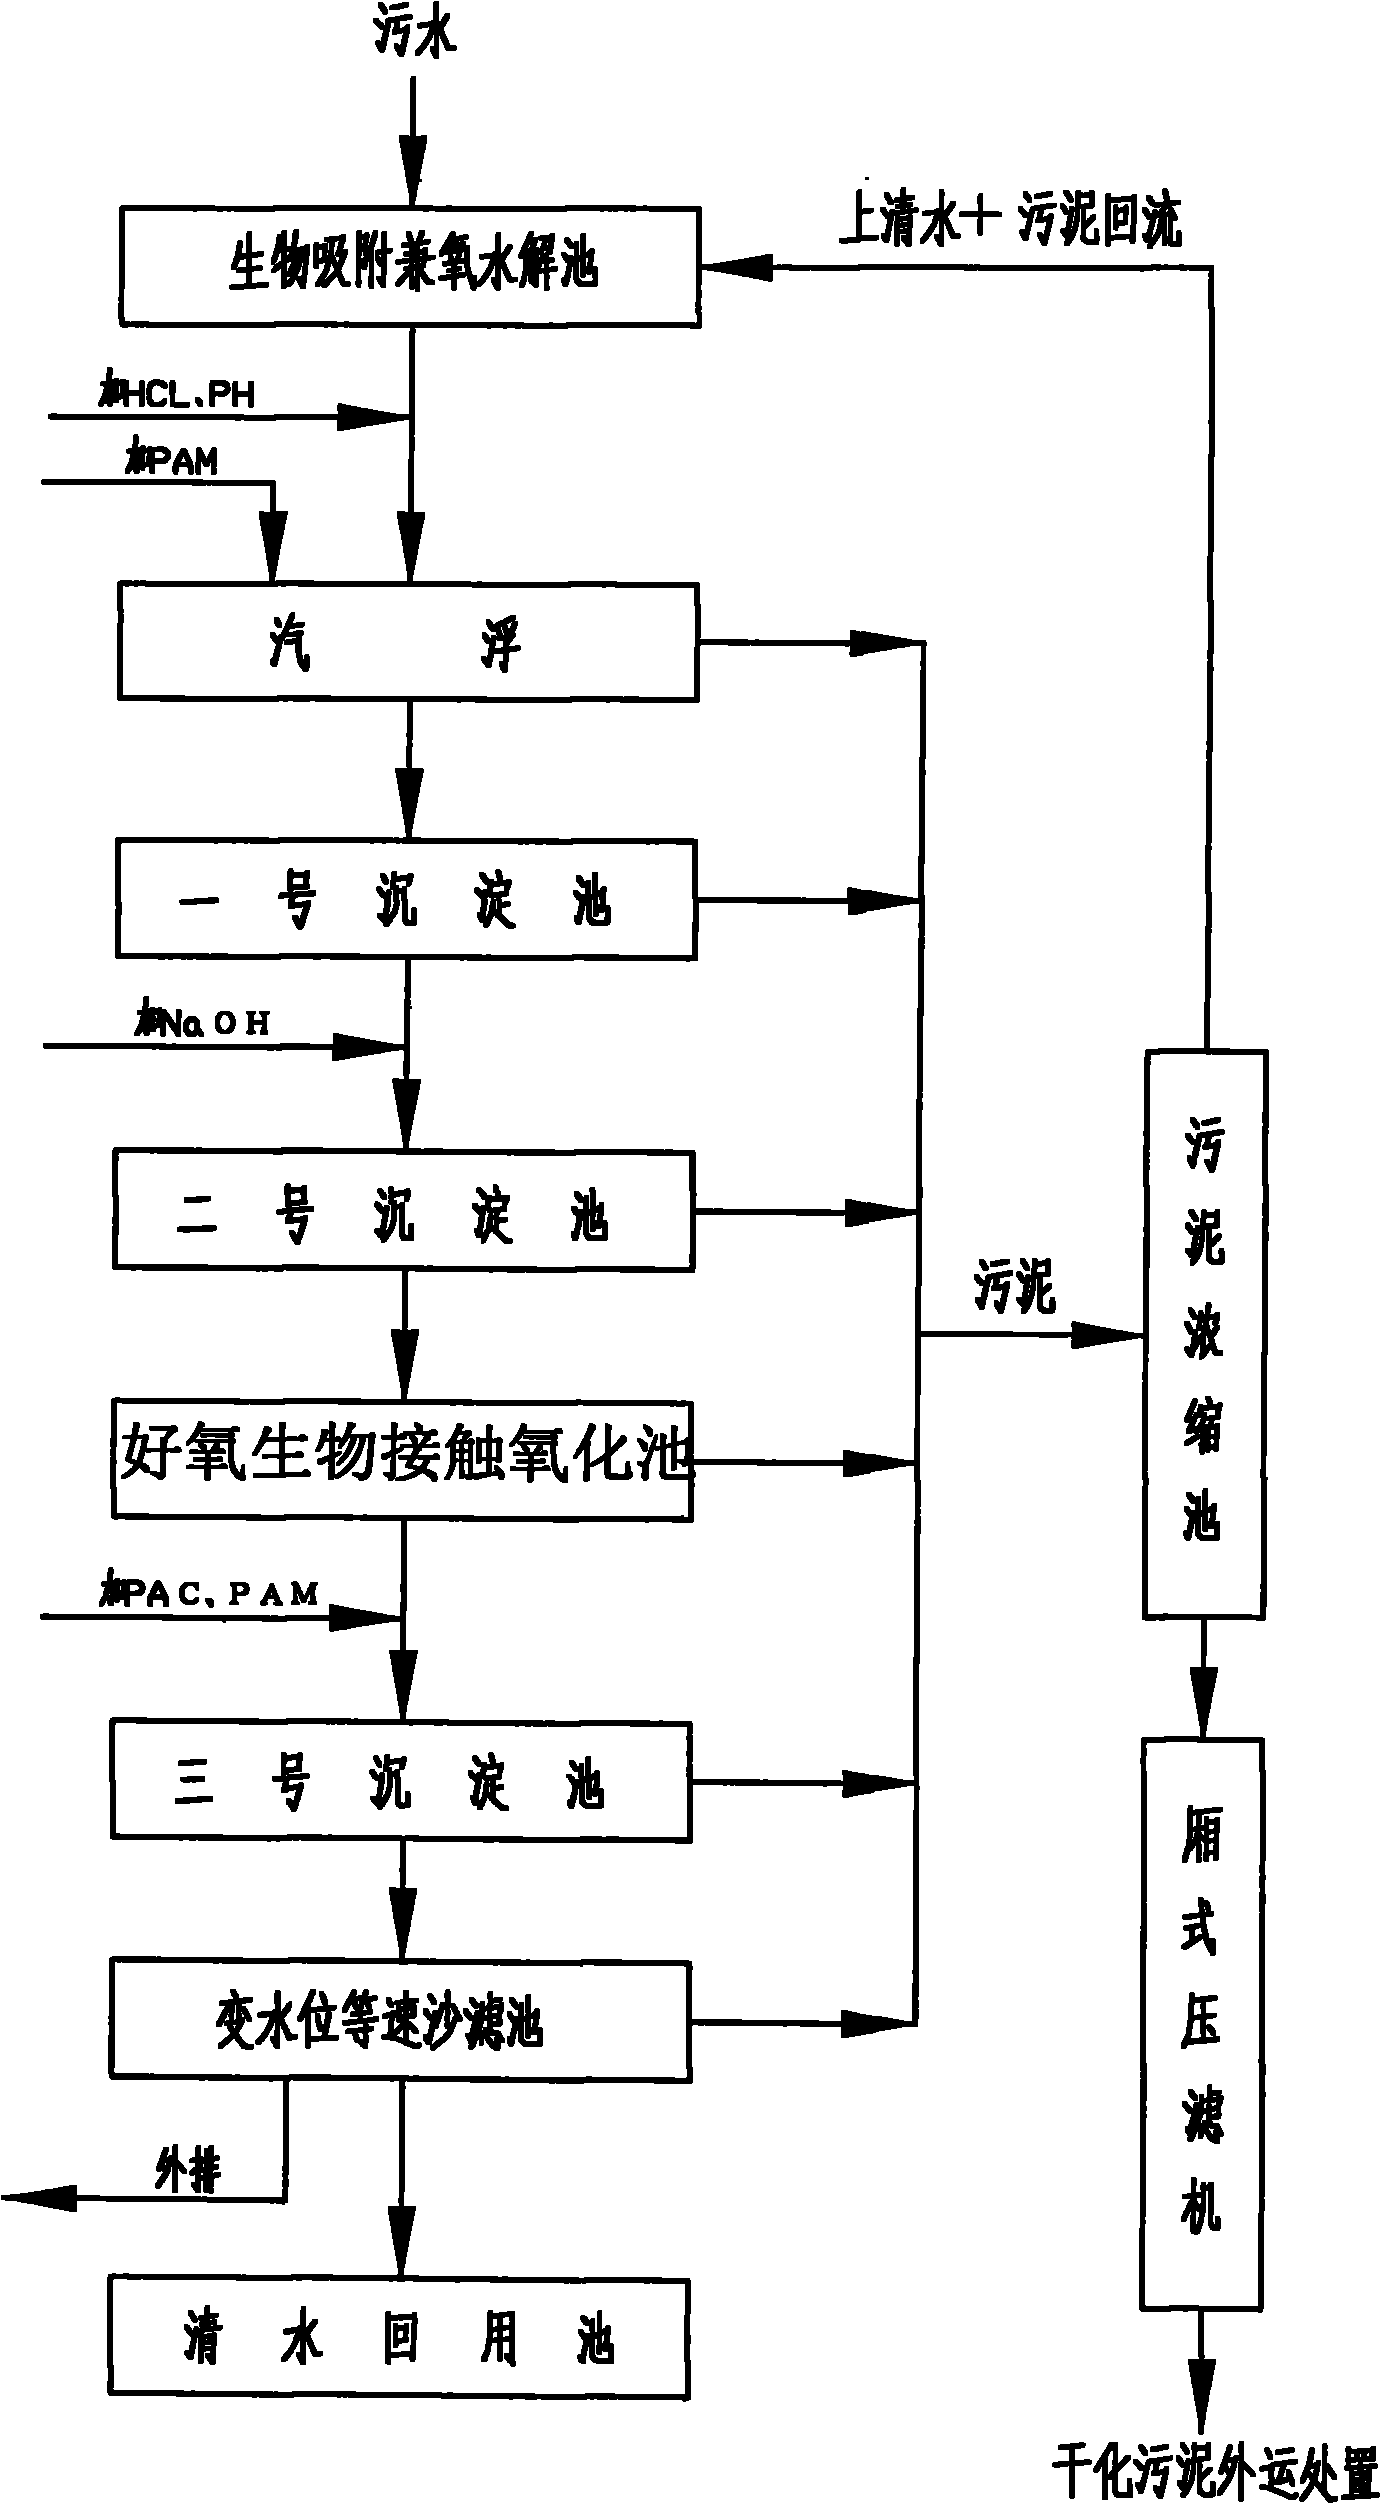 Method for sewage treatment during refined cotton production and odor control in sewage treatment